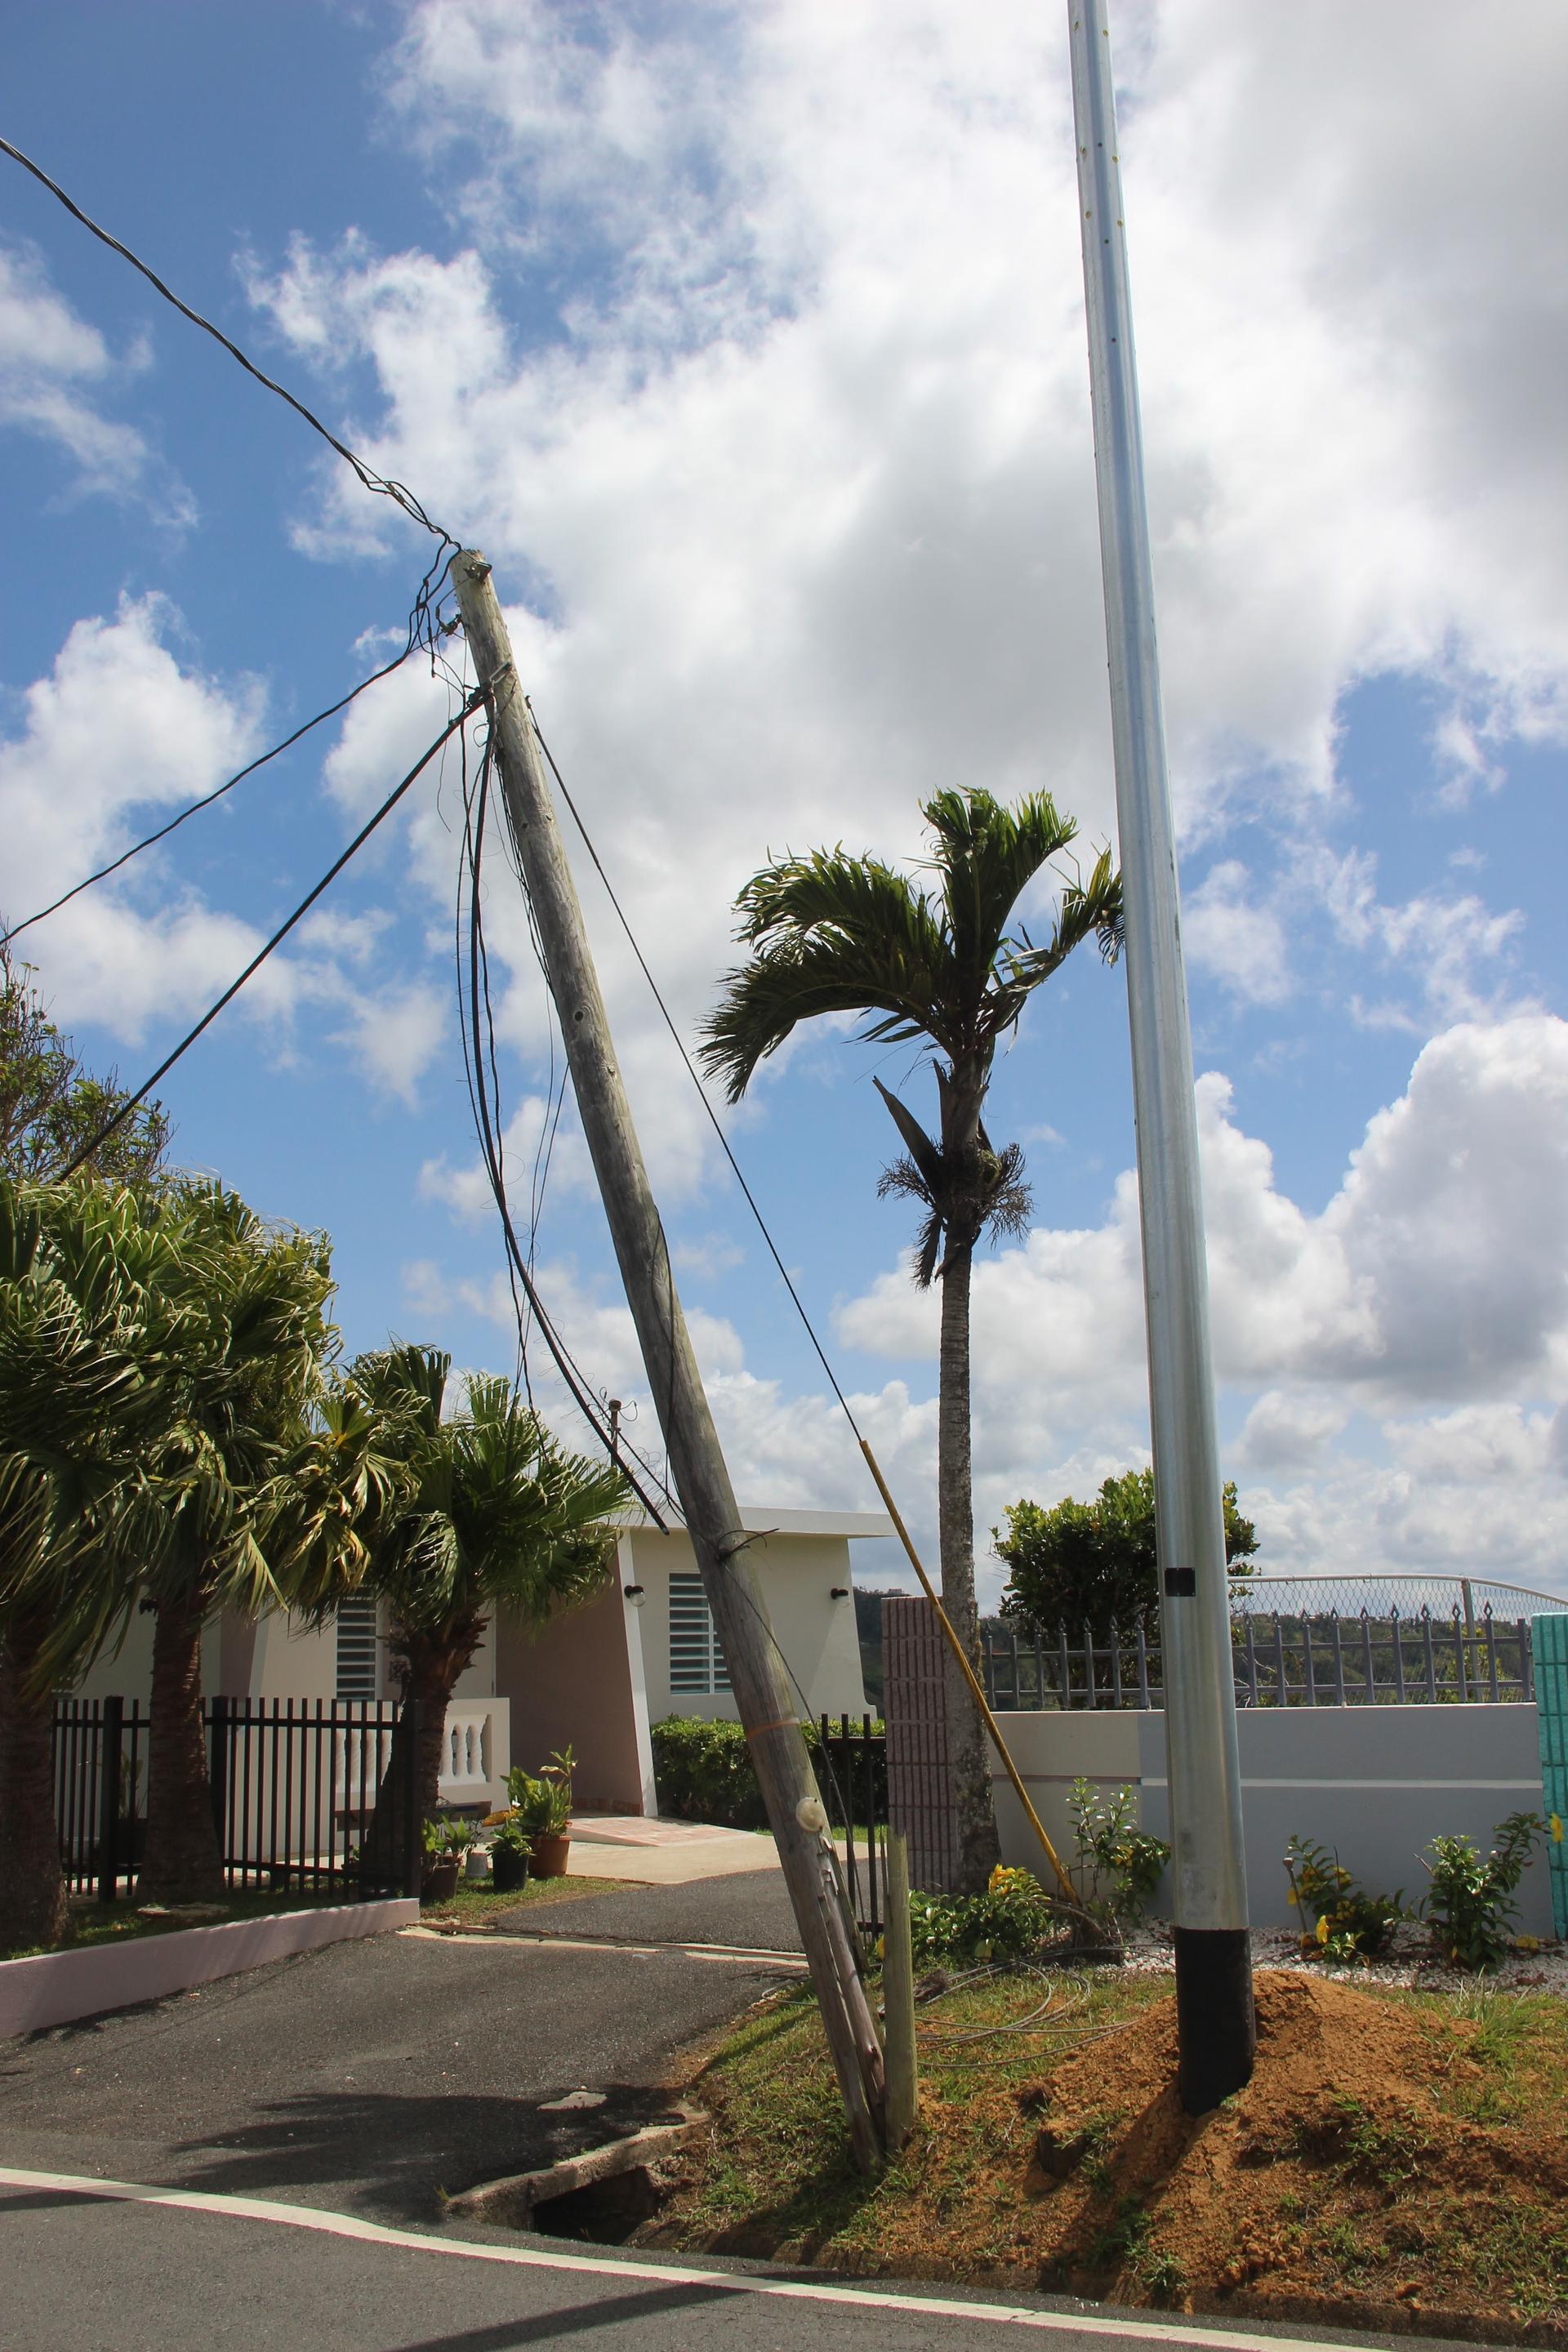 leaning power utility pole in Puerto Rico